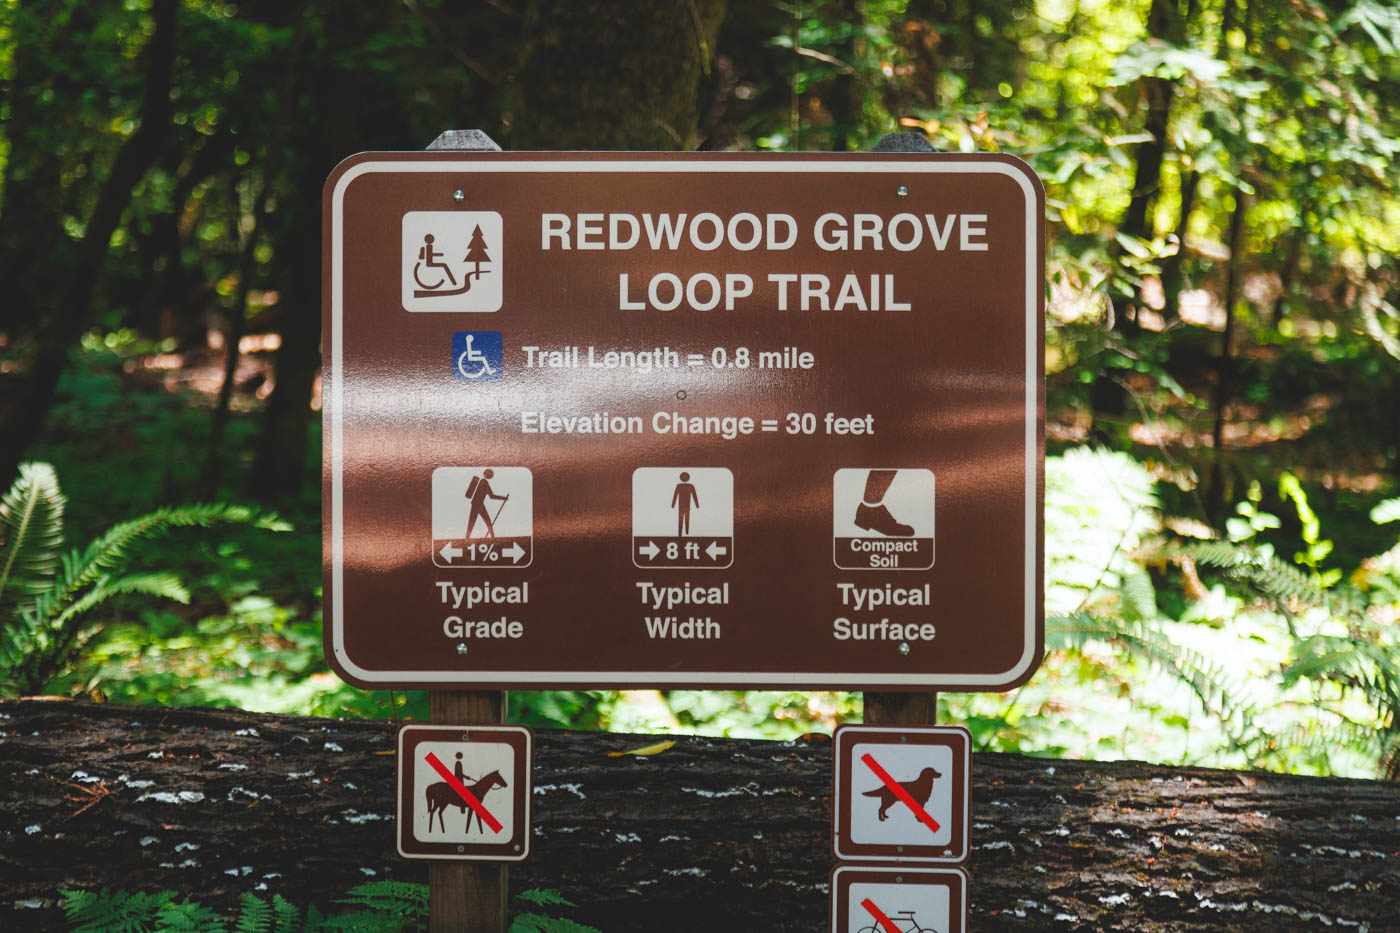 Trailhead and information sign for the Redwood Grove Loop Trail.